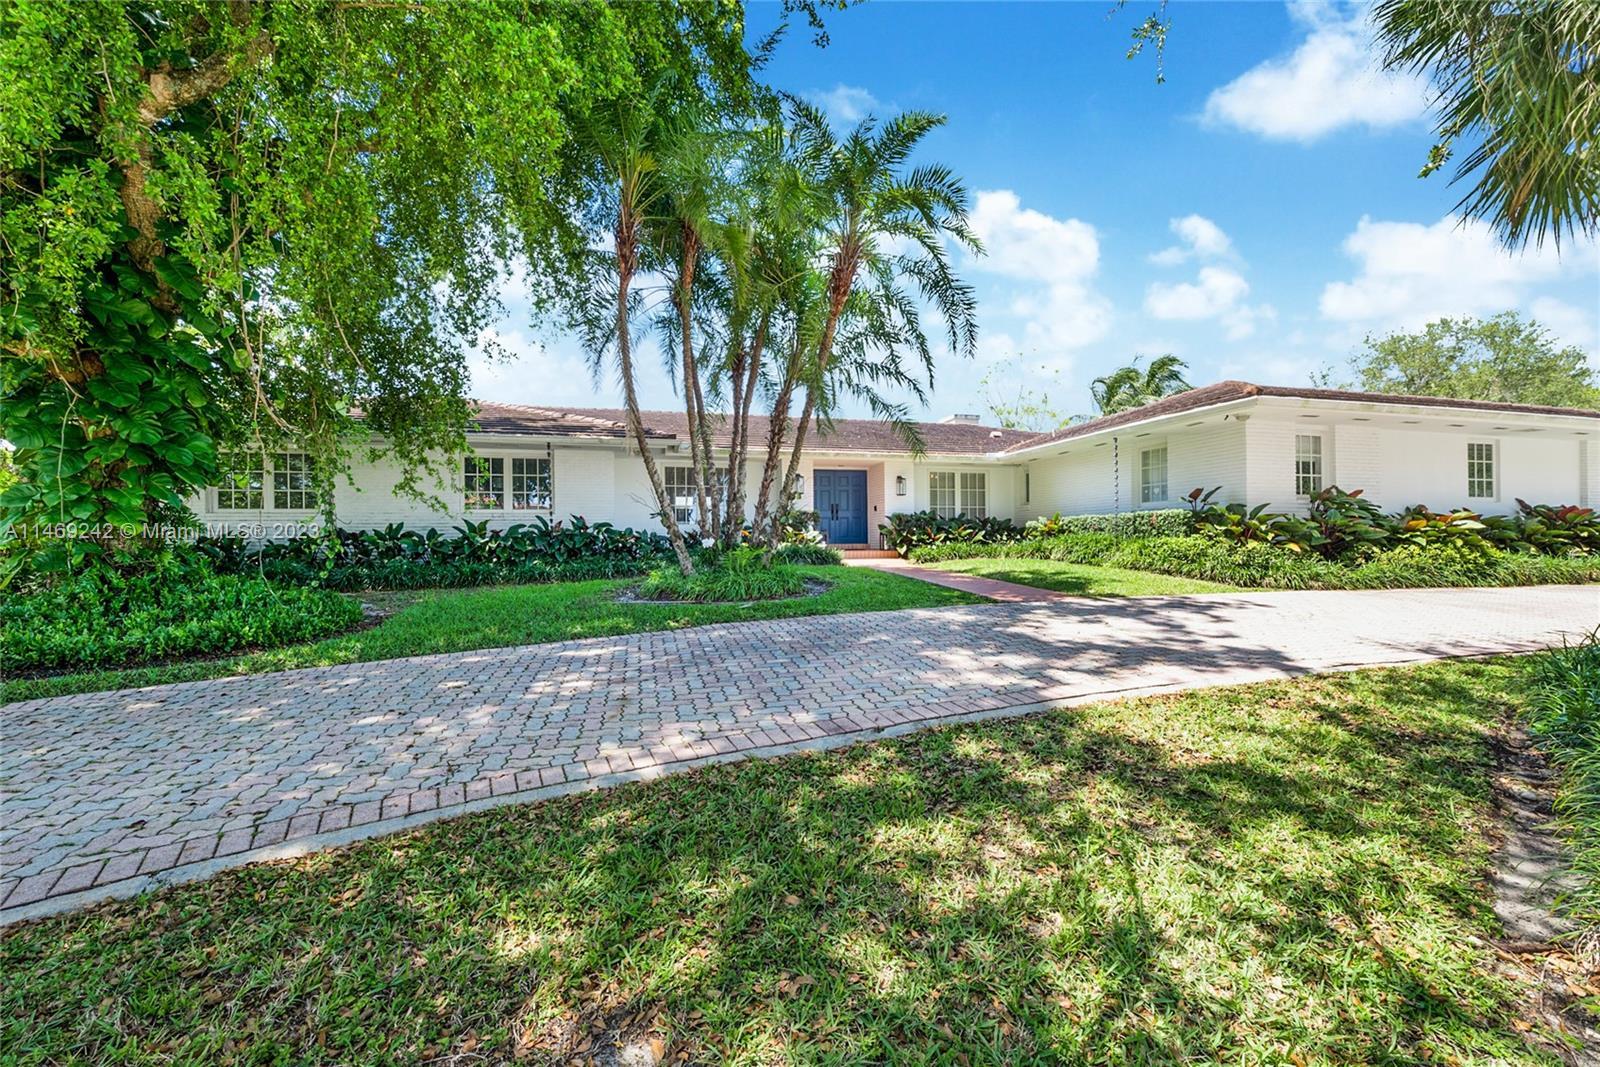 Photo of 610 Marquesa Dr in Coral Gables, FL